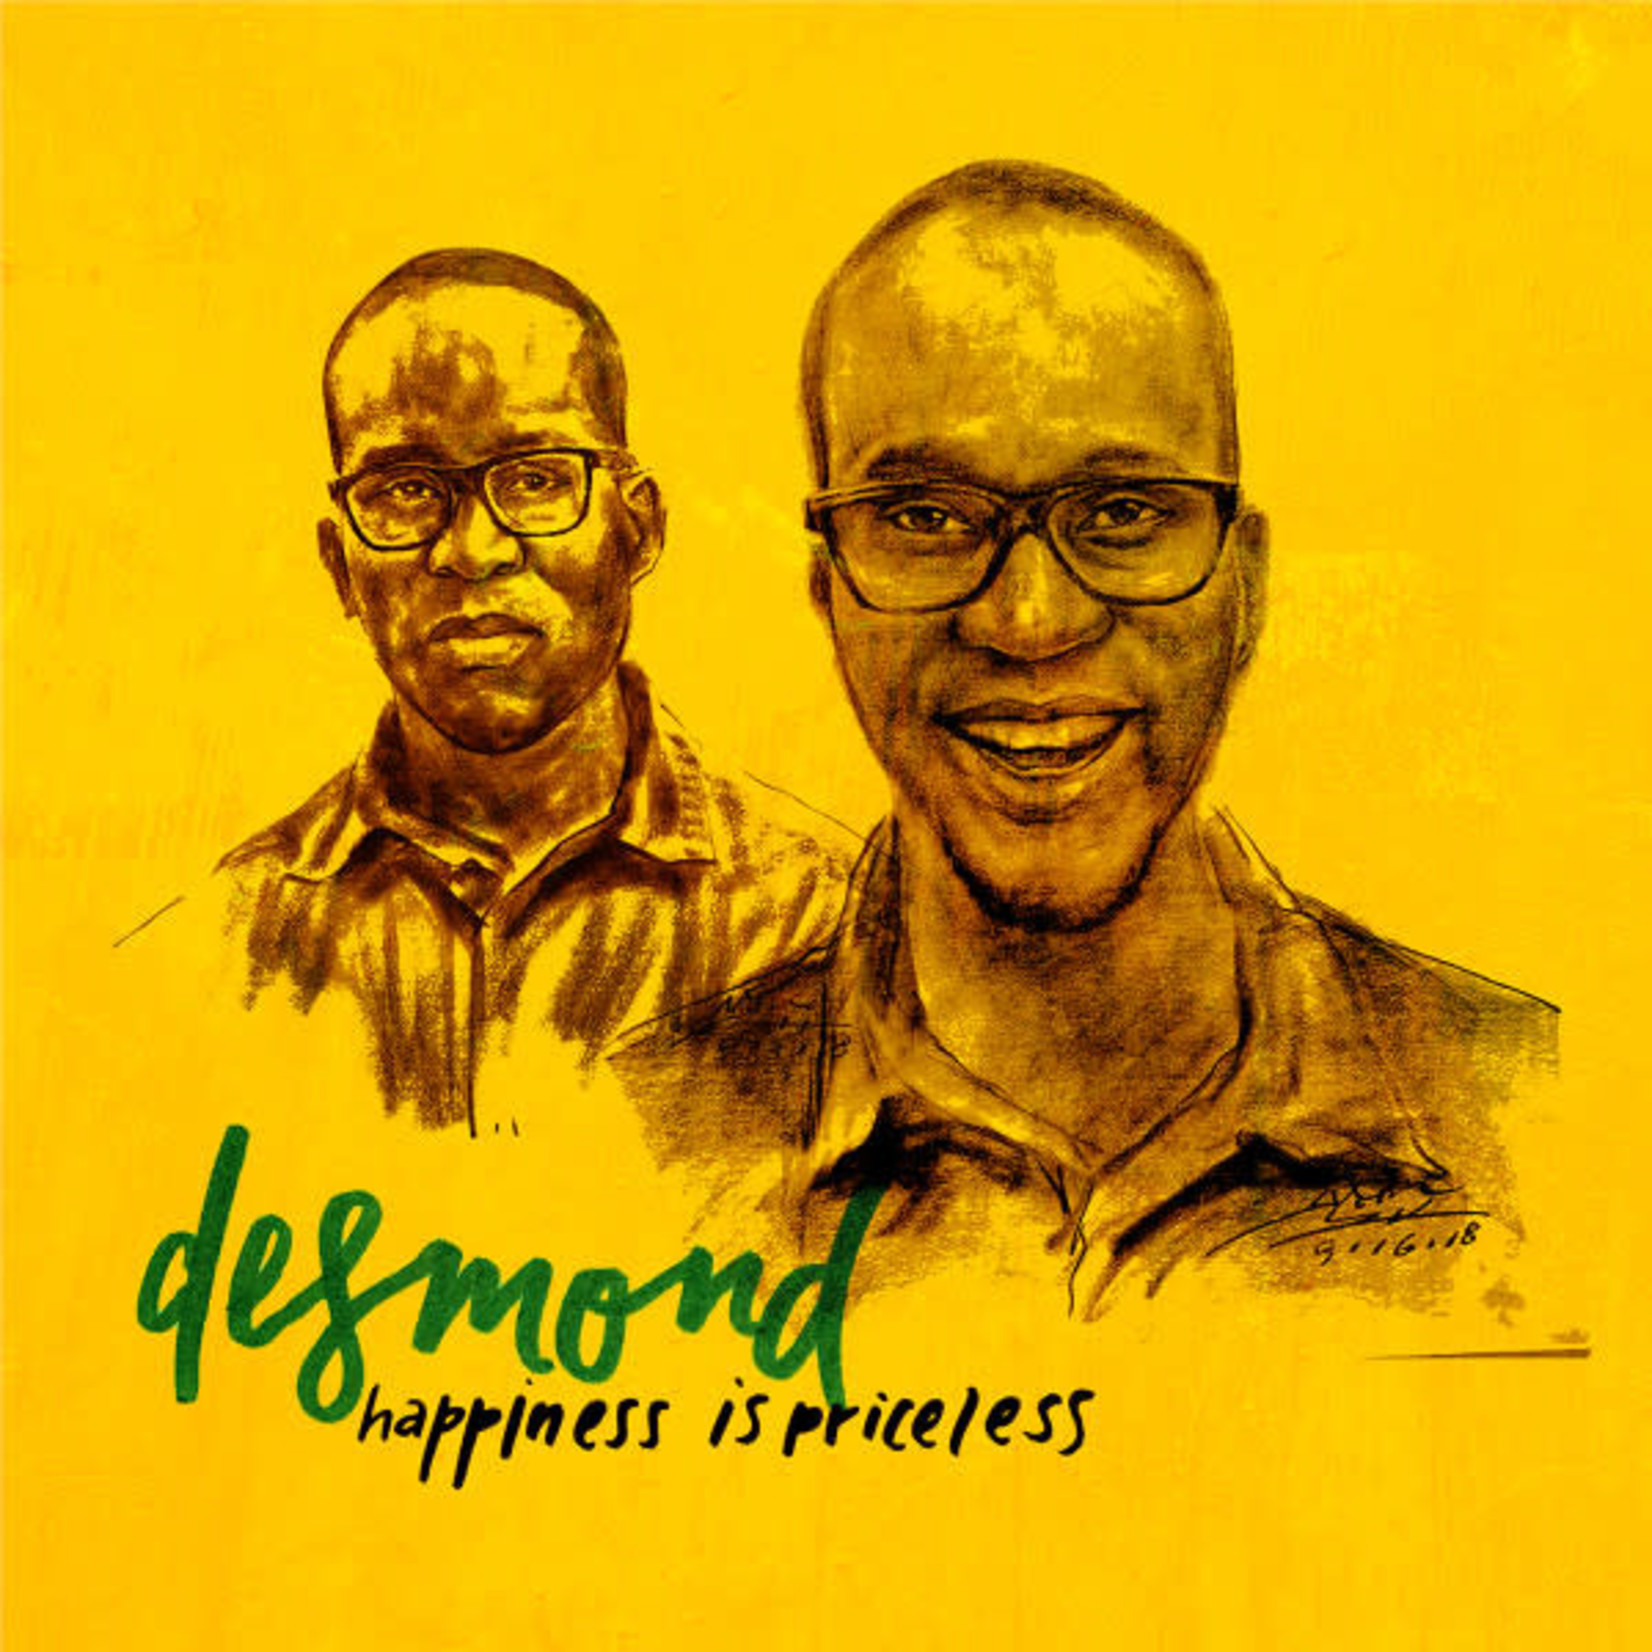 Desmond The Songwriter - Happiness is Priceless (LP) [Green]